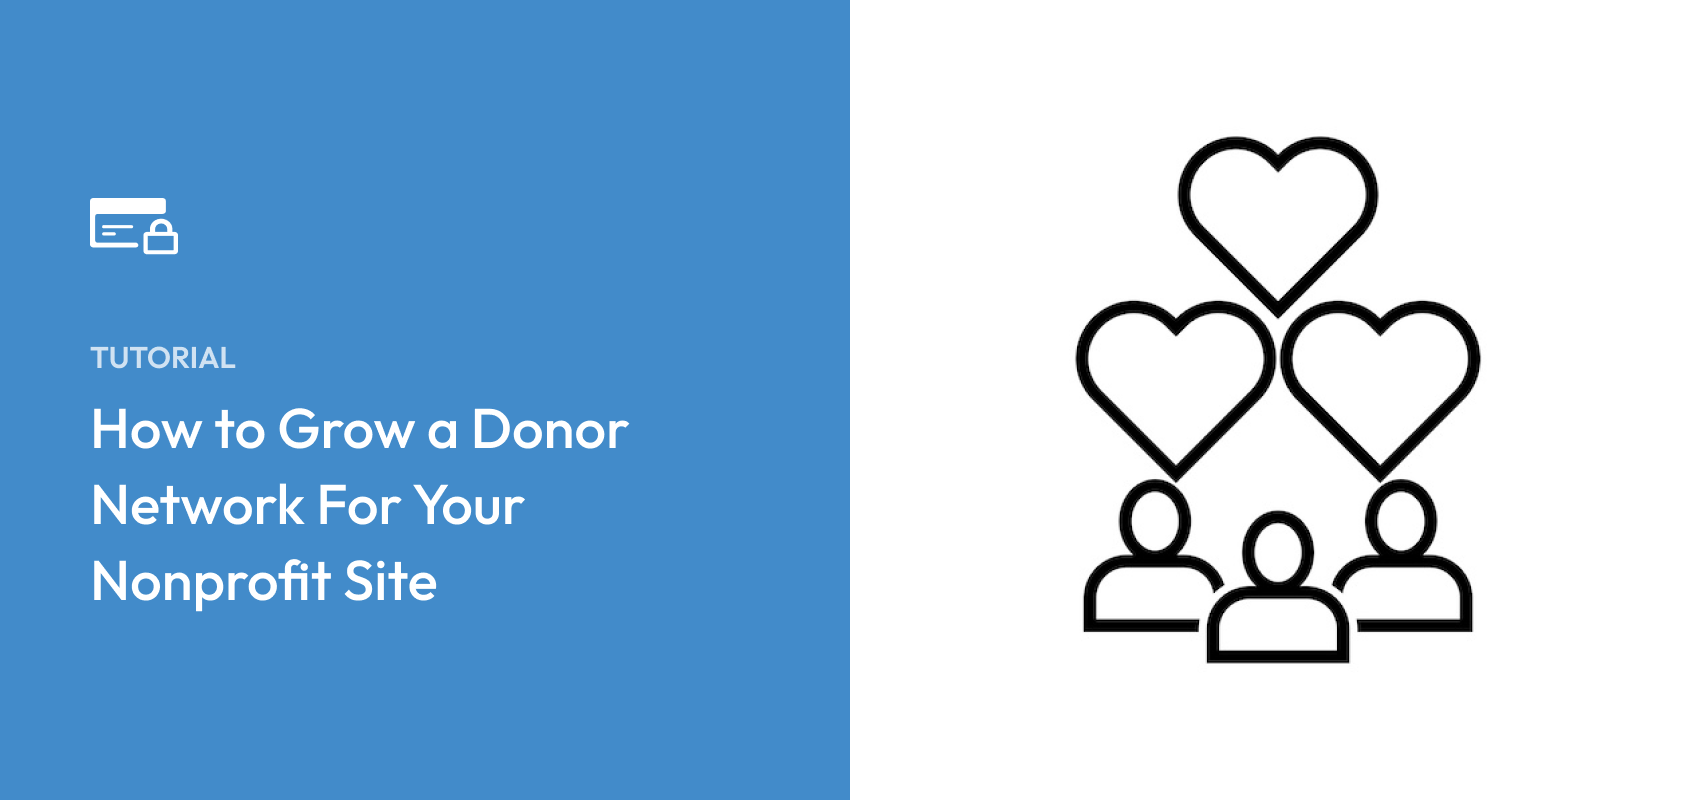 How to Grow a Donor Network For Your Nonprofit Site